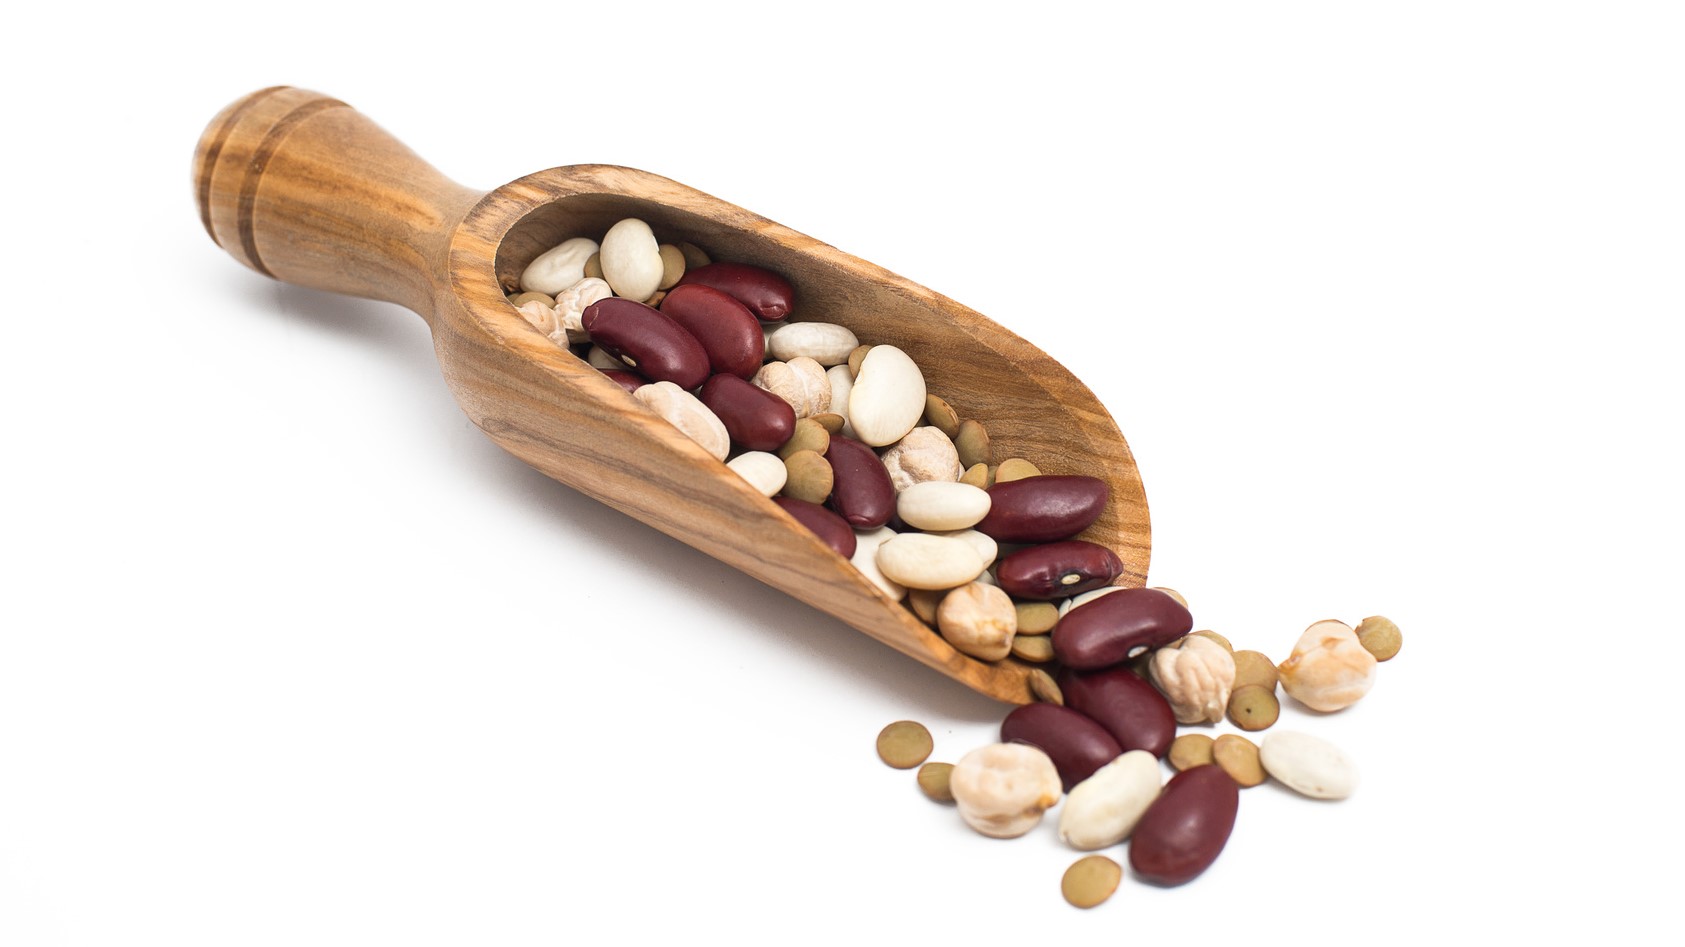 Picture of legumes in wooden scoop on white background.